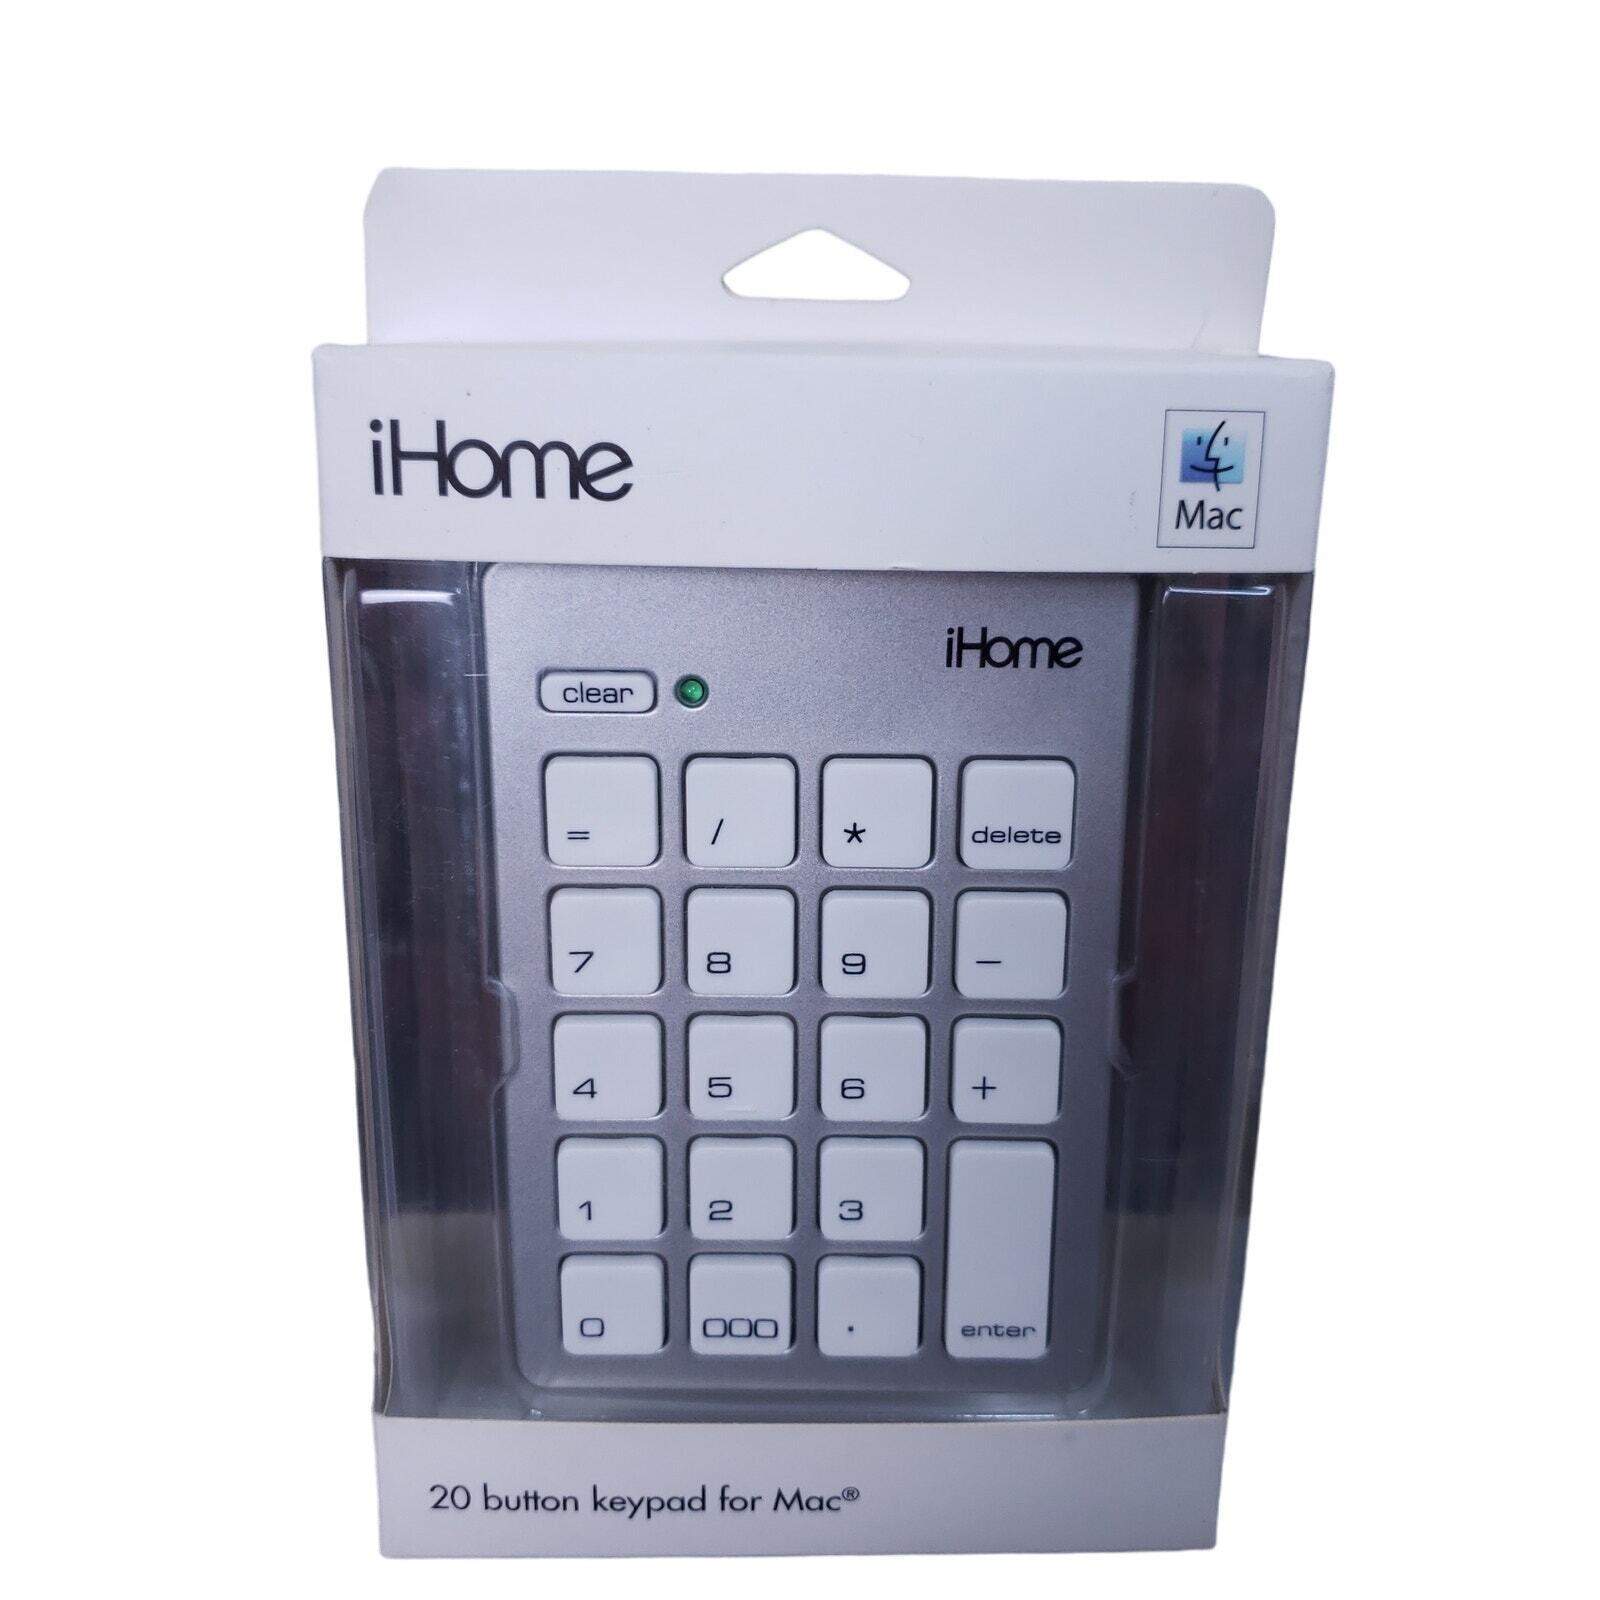 iHome 20 Button Keypad for Mac New